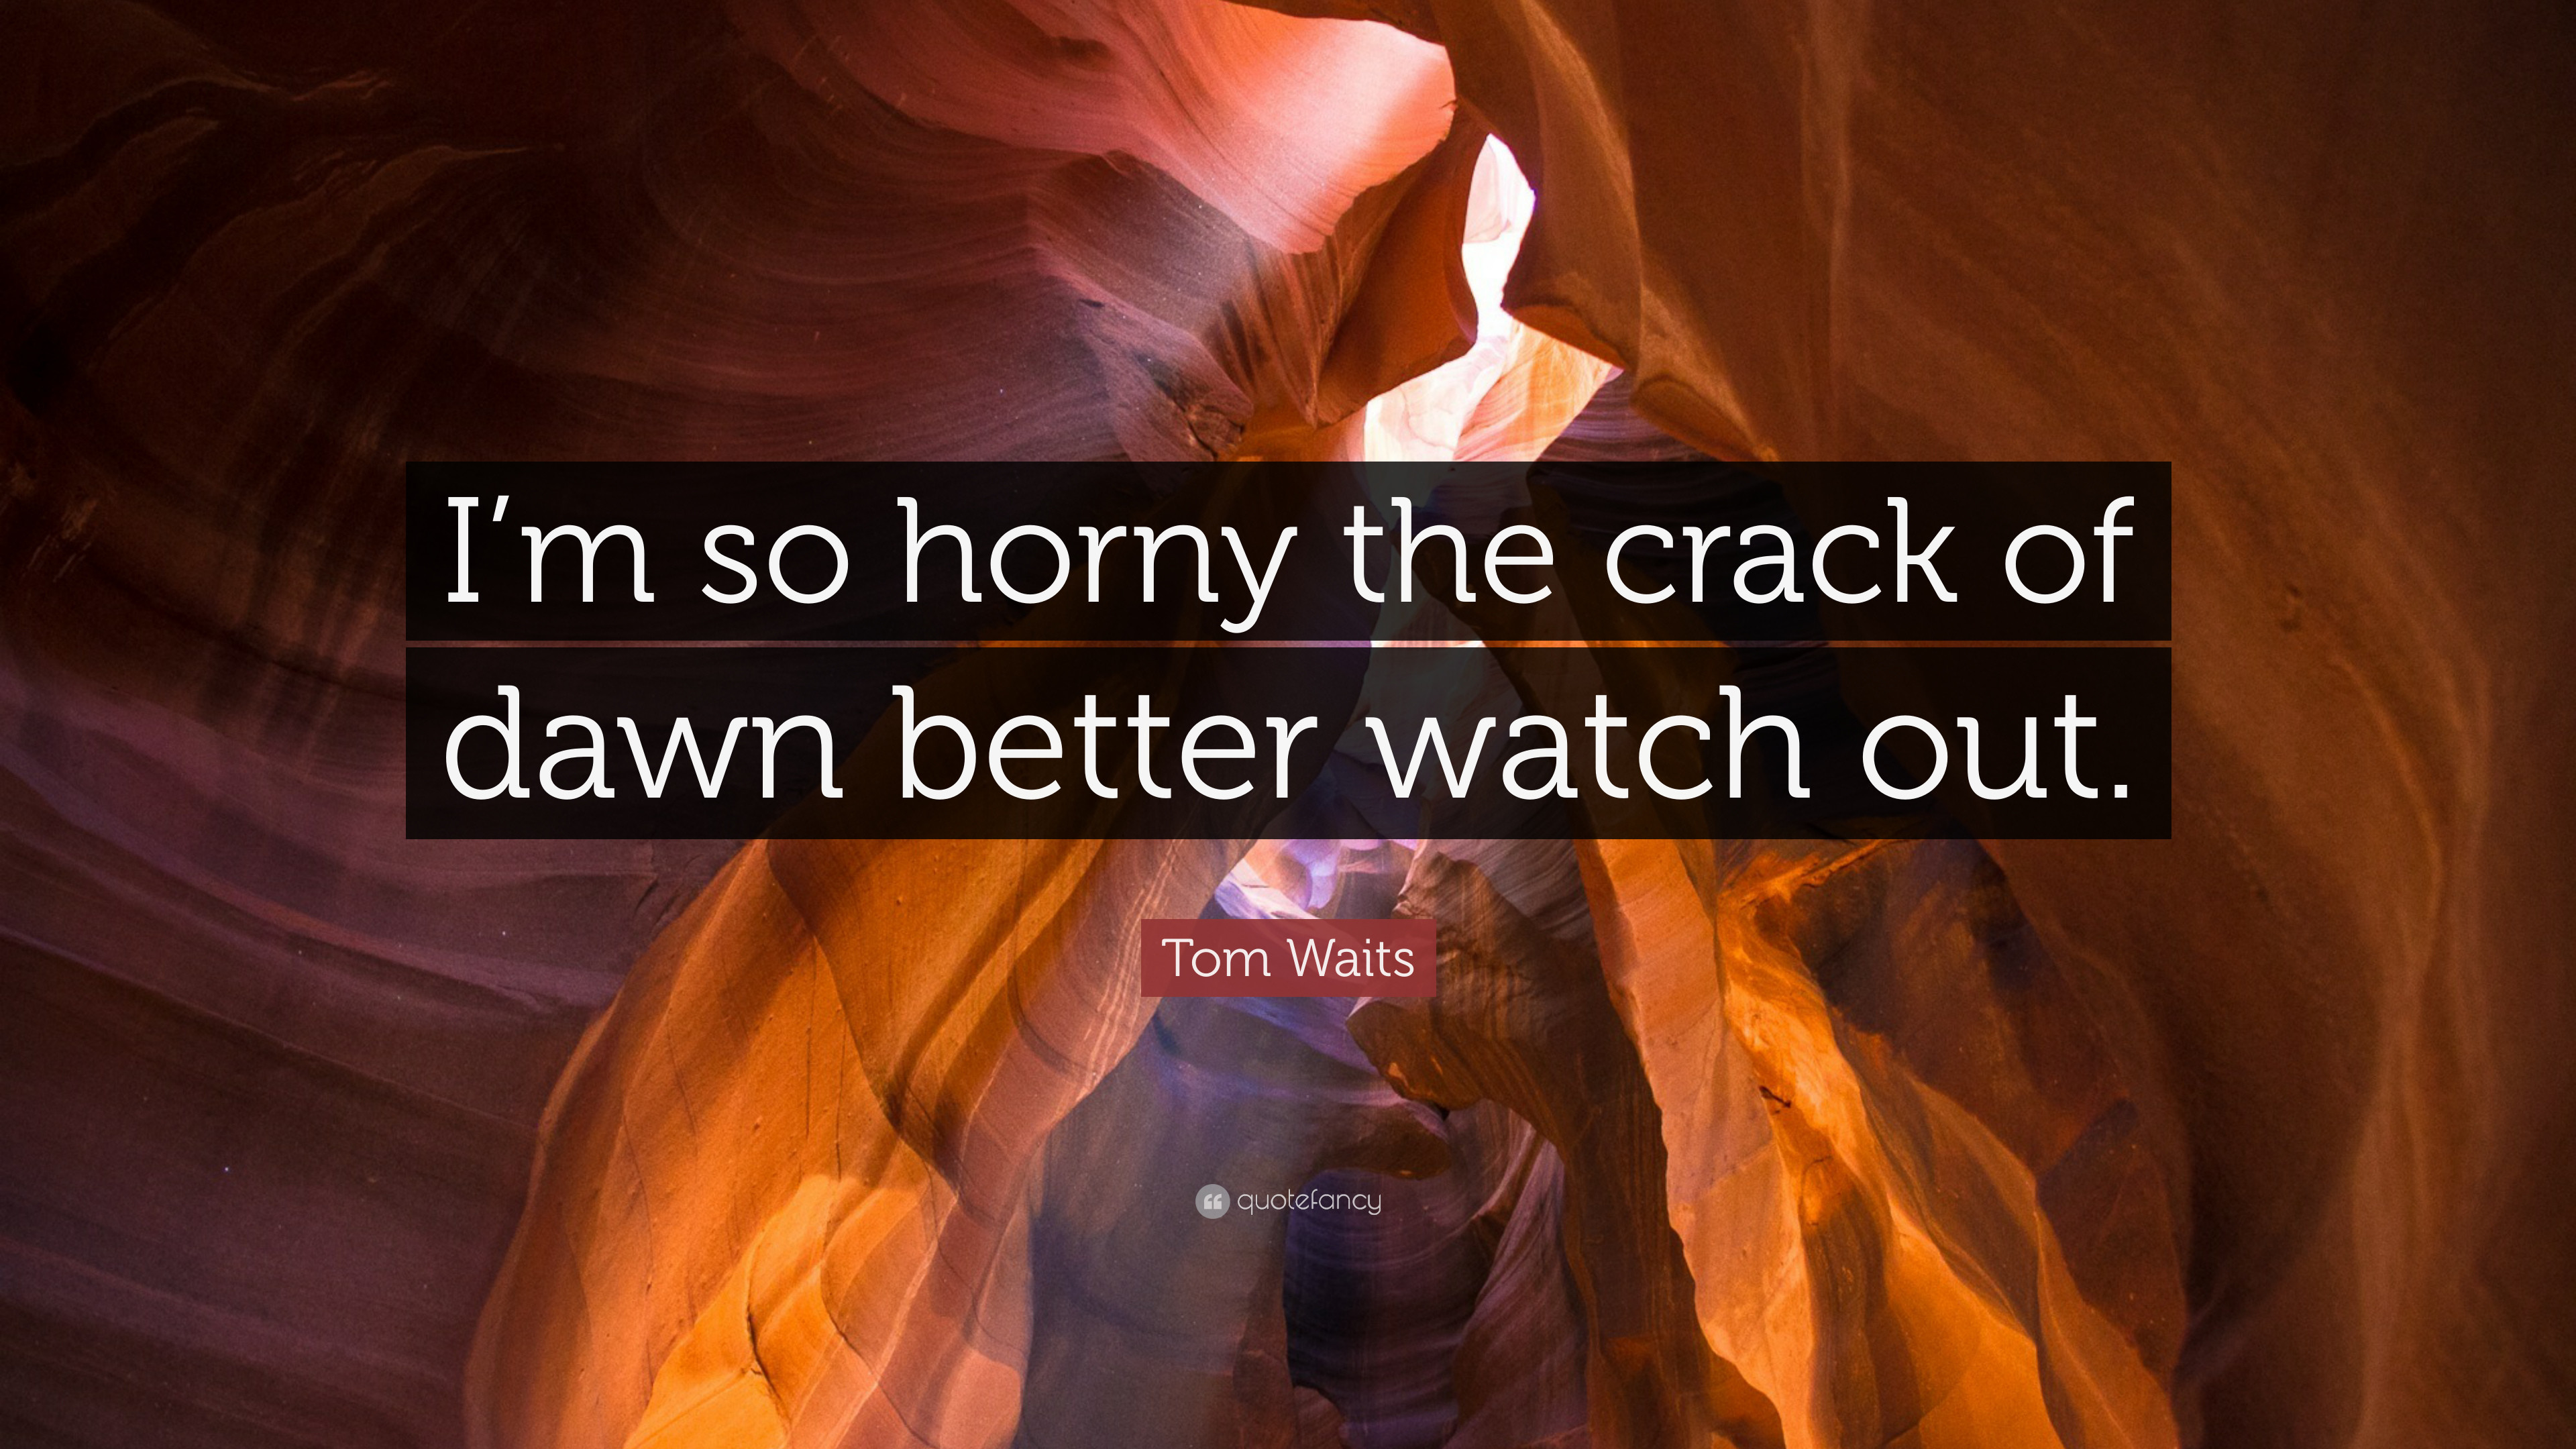 3840x2160 Tom Waits Quote: “I'm so horny the crack of dawn better watch